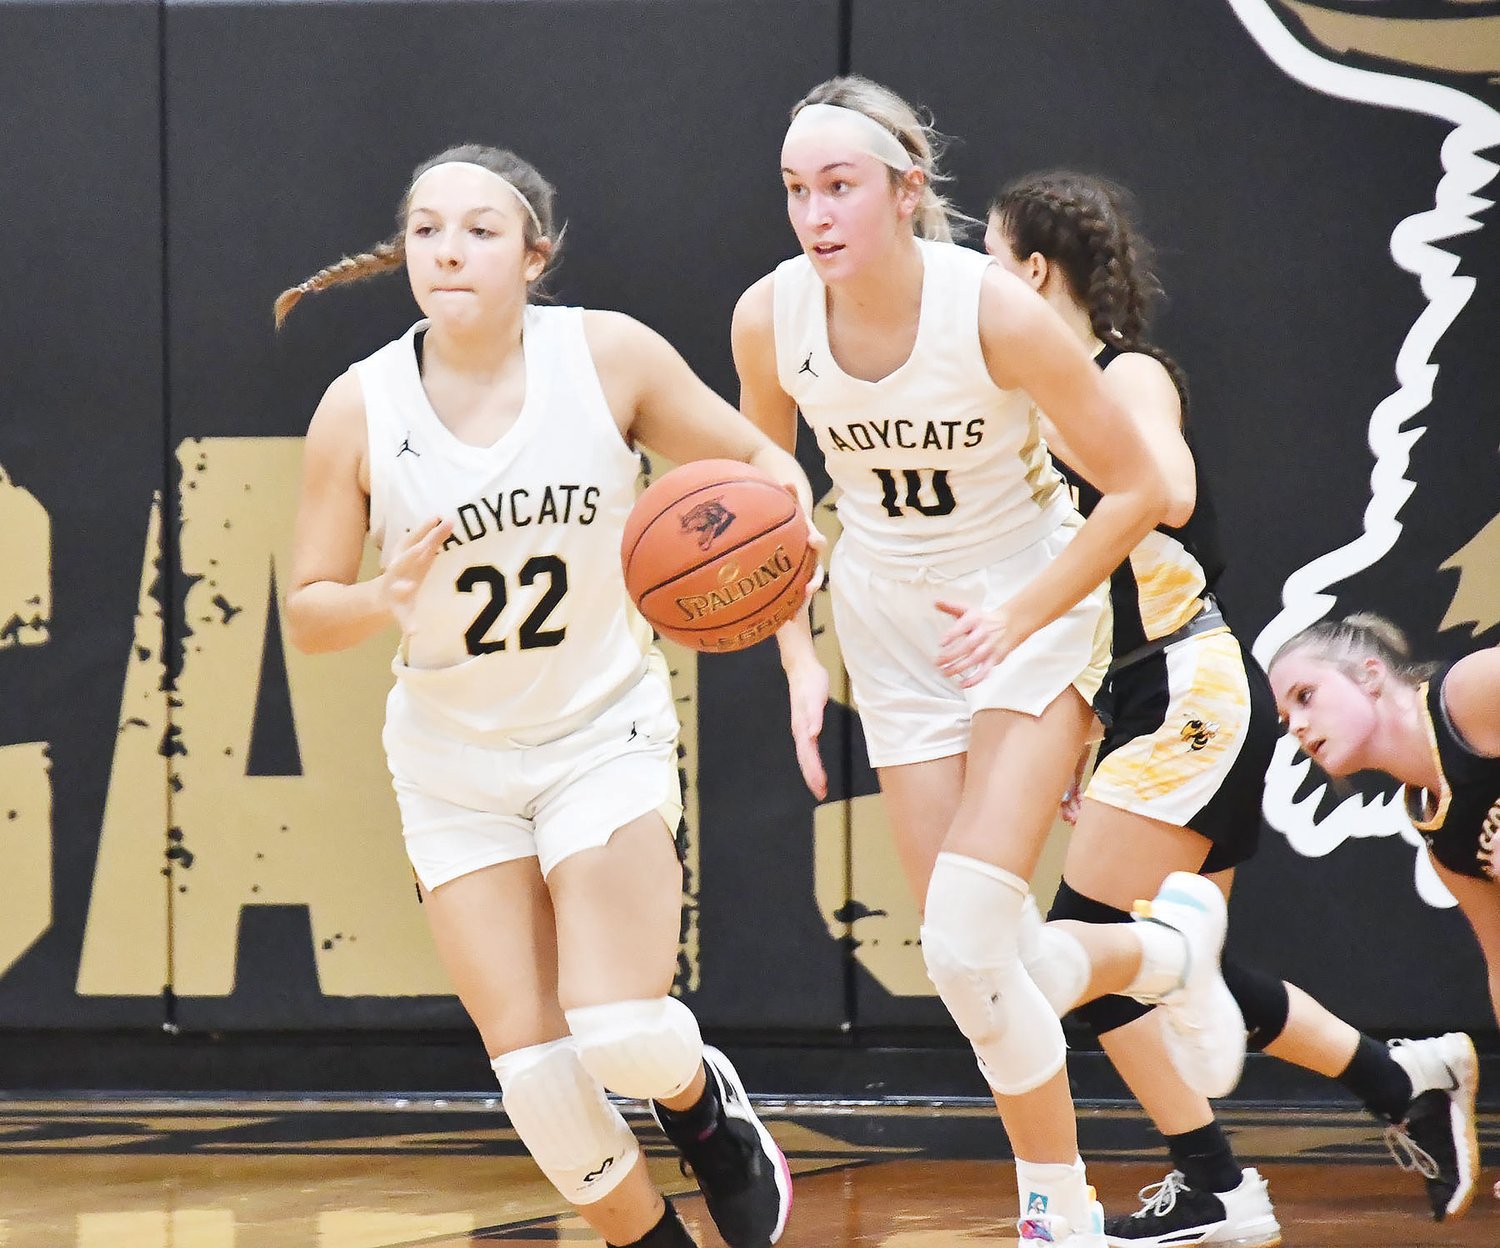 Cairo's Mallori Hankins (22) leads the fastbreak while Macie Harman (10) trails during a CAC girls' basketball game in Cairo dated Thursday, Jan. 12.